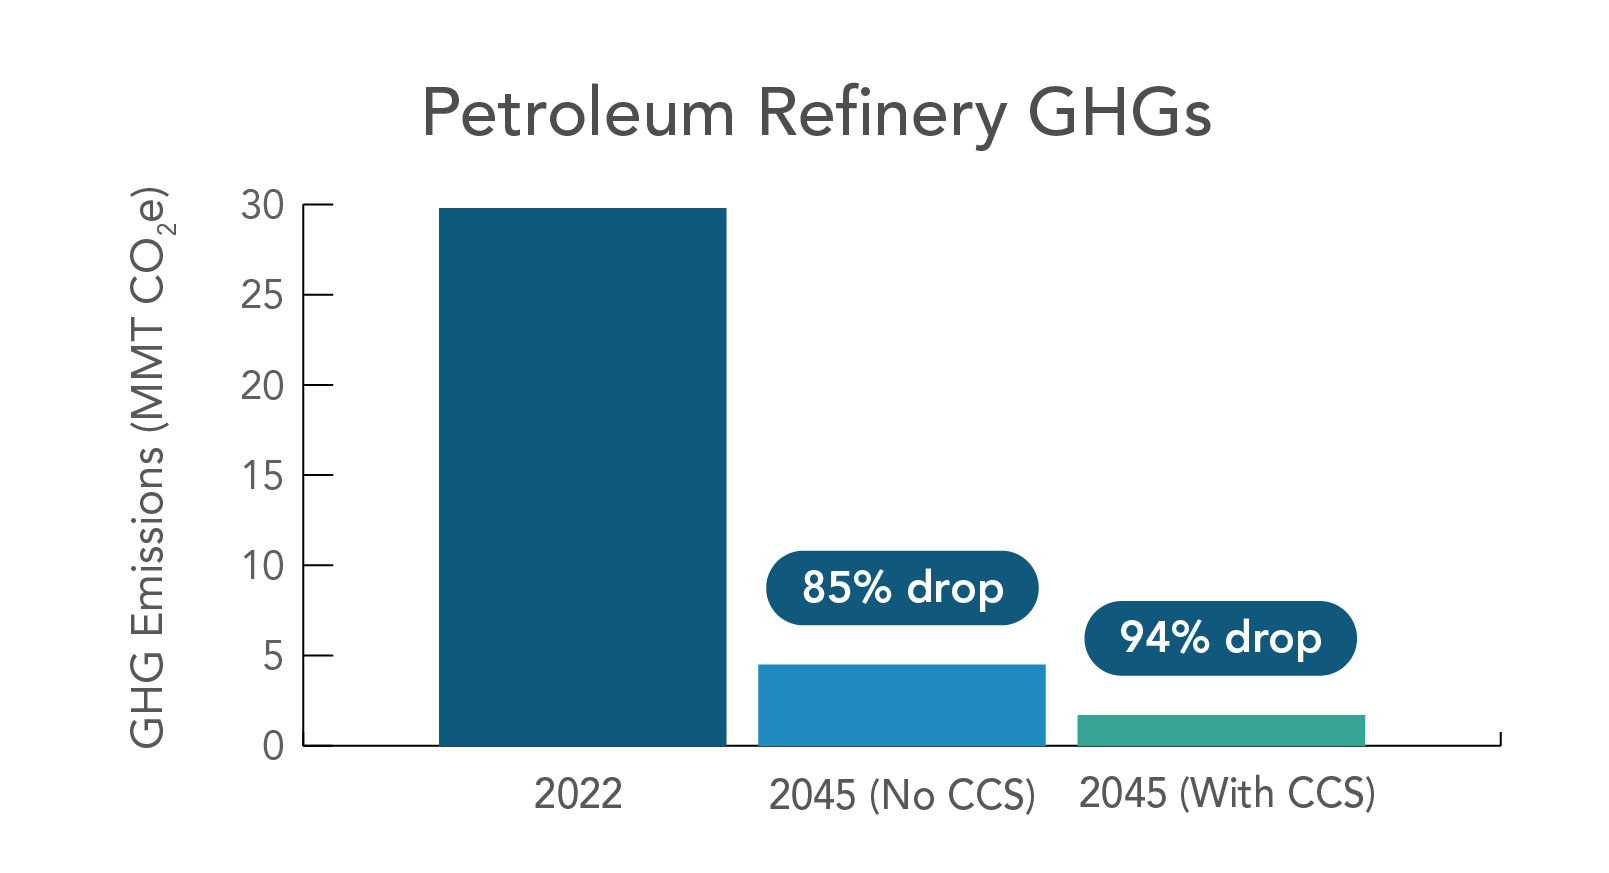 Petroleum Refinery GHGs bar chart showing 85% drop in 2045 (no CCS) and 94% drop in 2045 (with CCS)